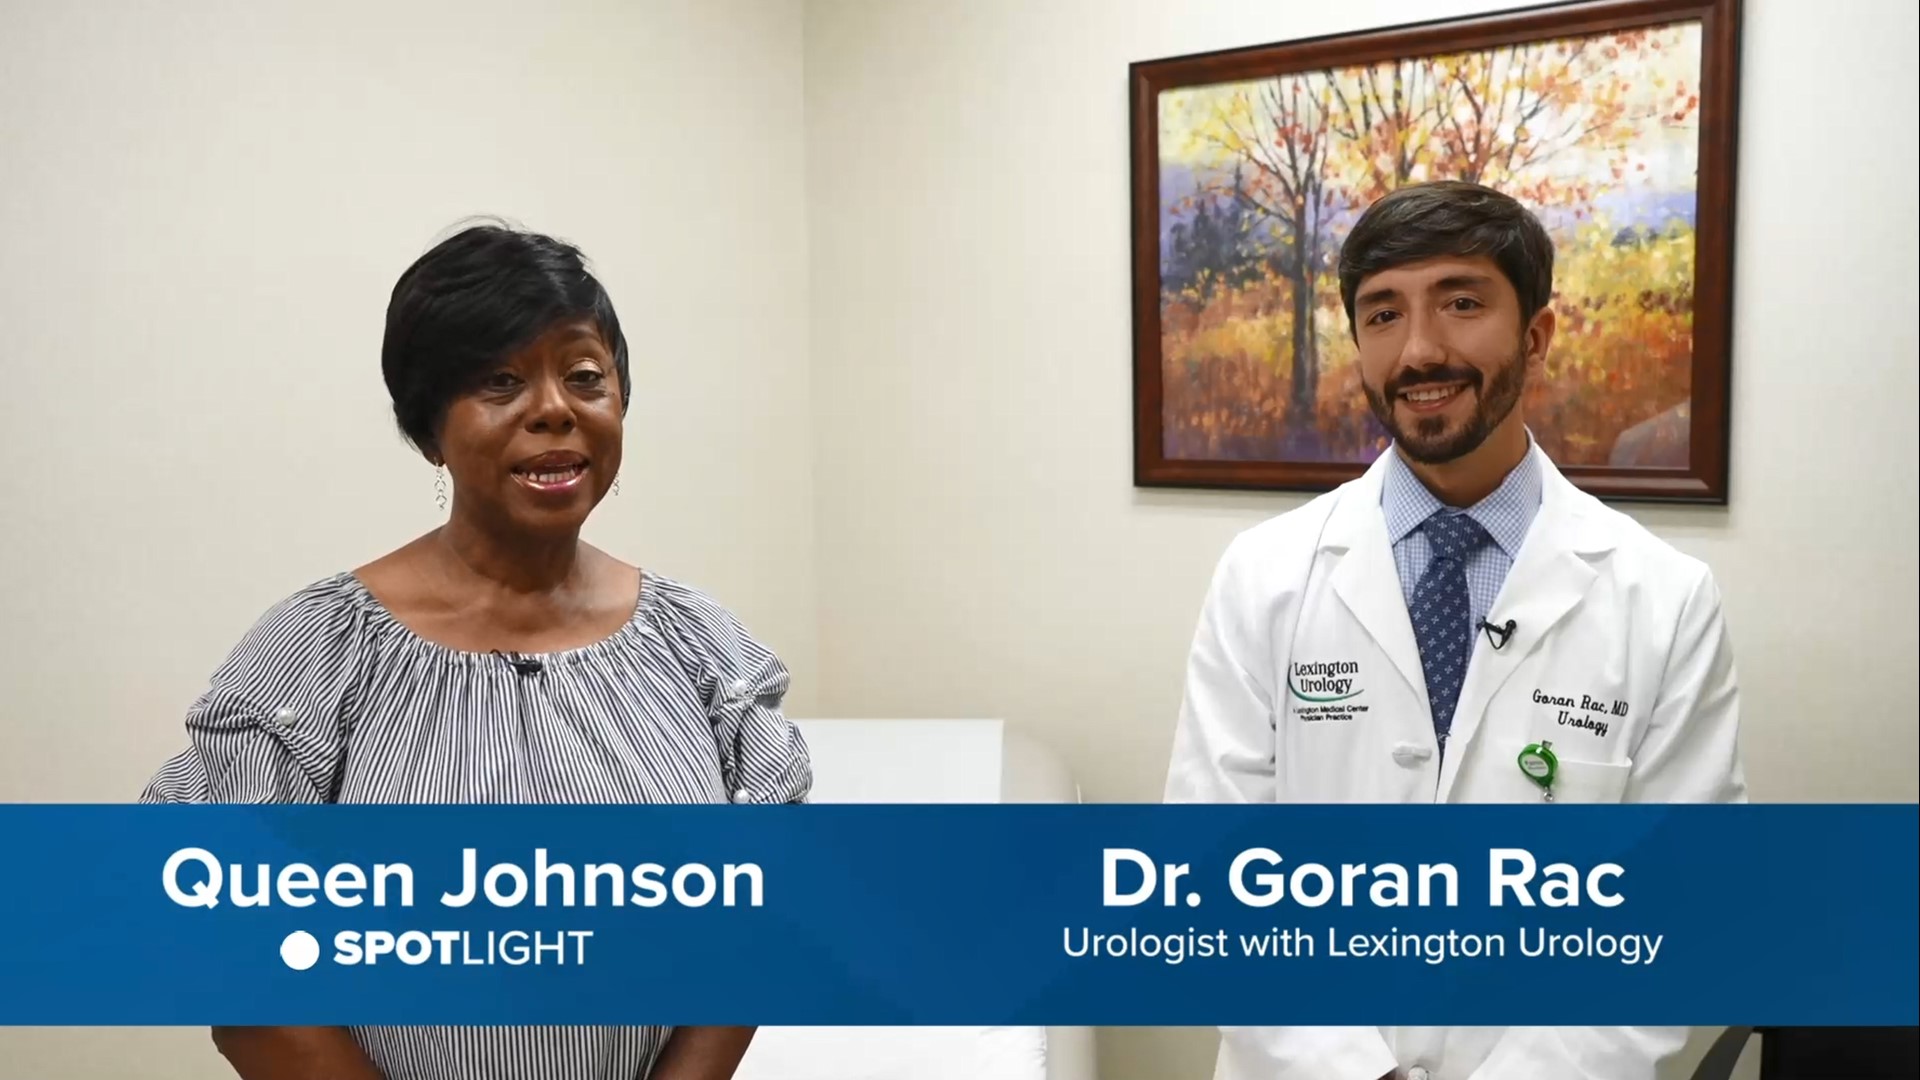 September is National Prostate Cancer Awareness Month. Check out Dr. Goran Rac, urologist with Lexington Urology, as he talks about this disease.